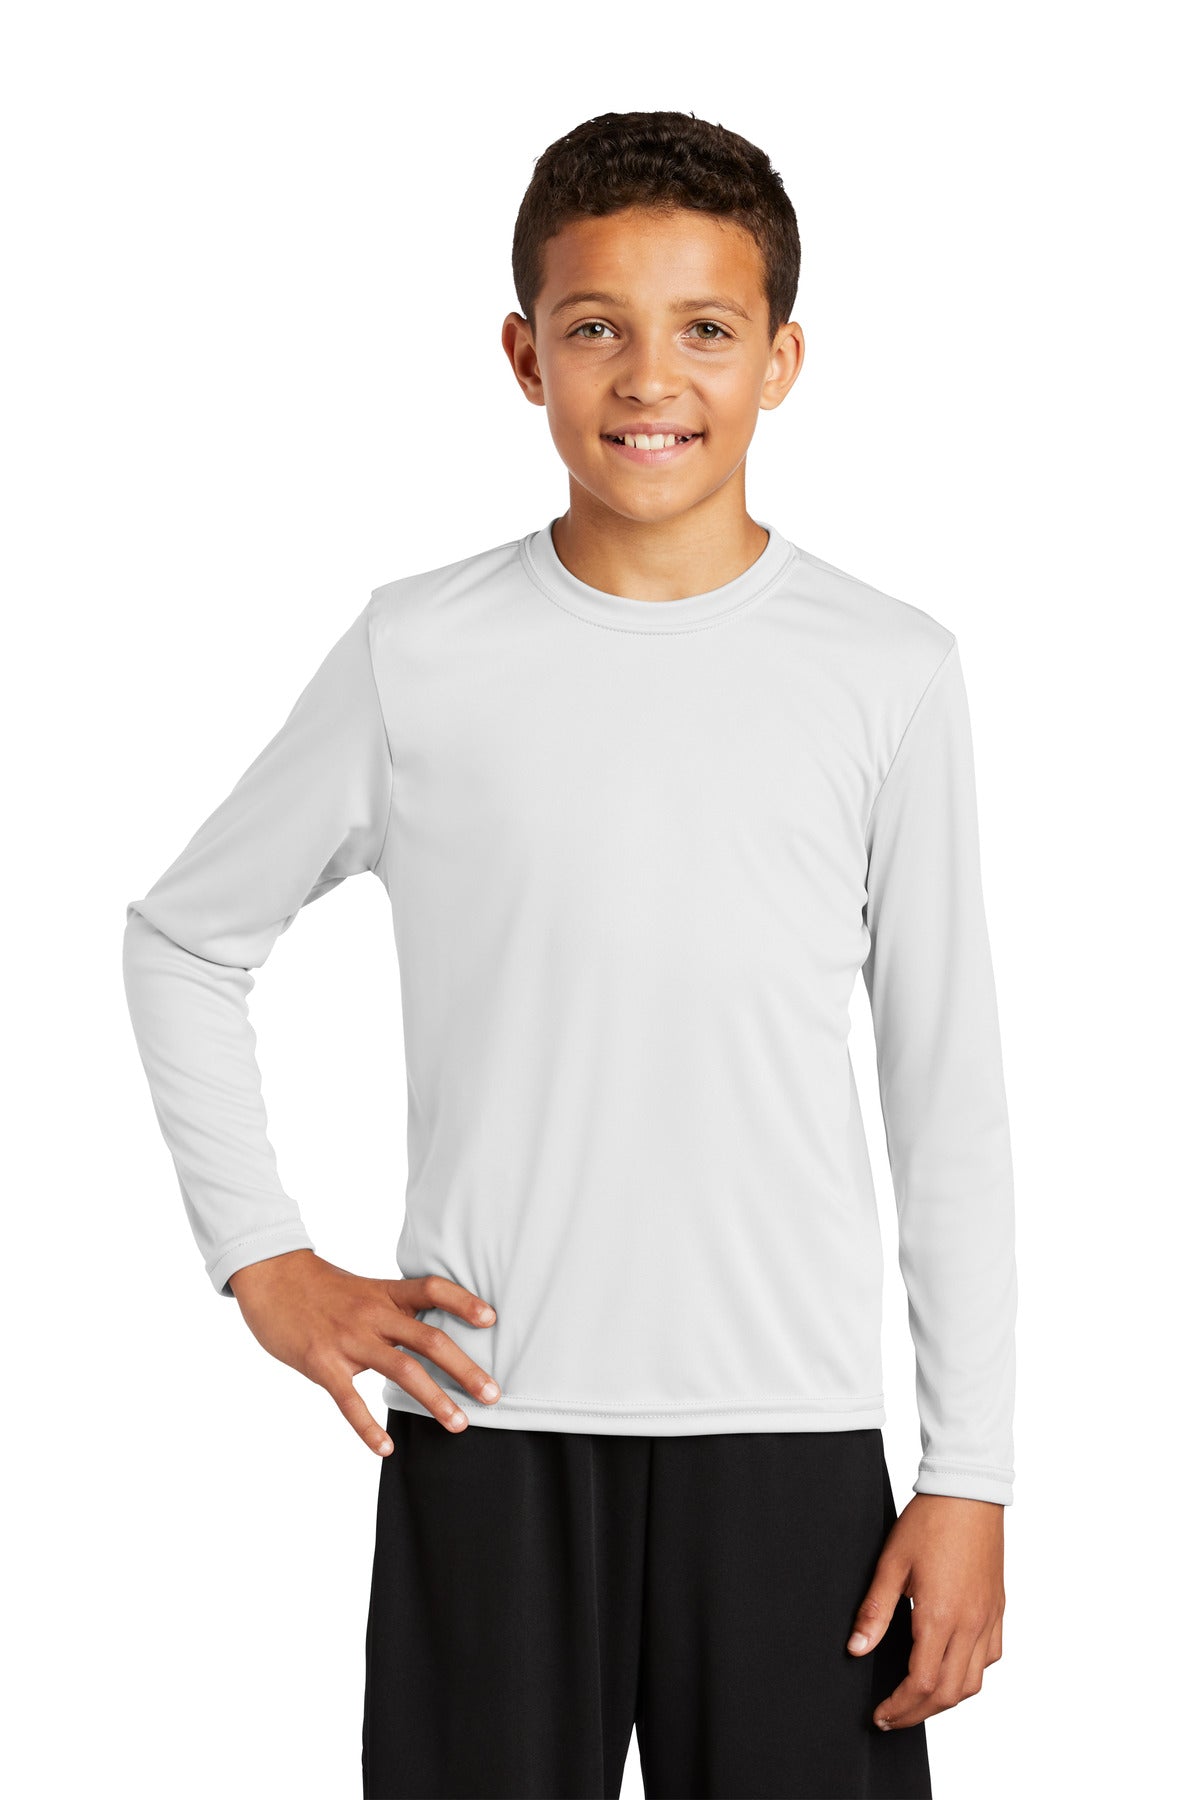 Sport-Tek® Youth Long Sleeve PosiCharge® Competitor™ Tee. YST350LS [White] - DFW Impression